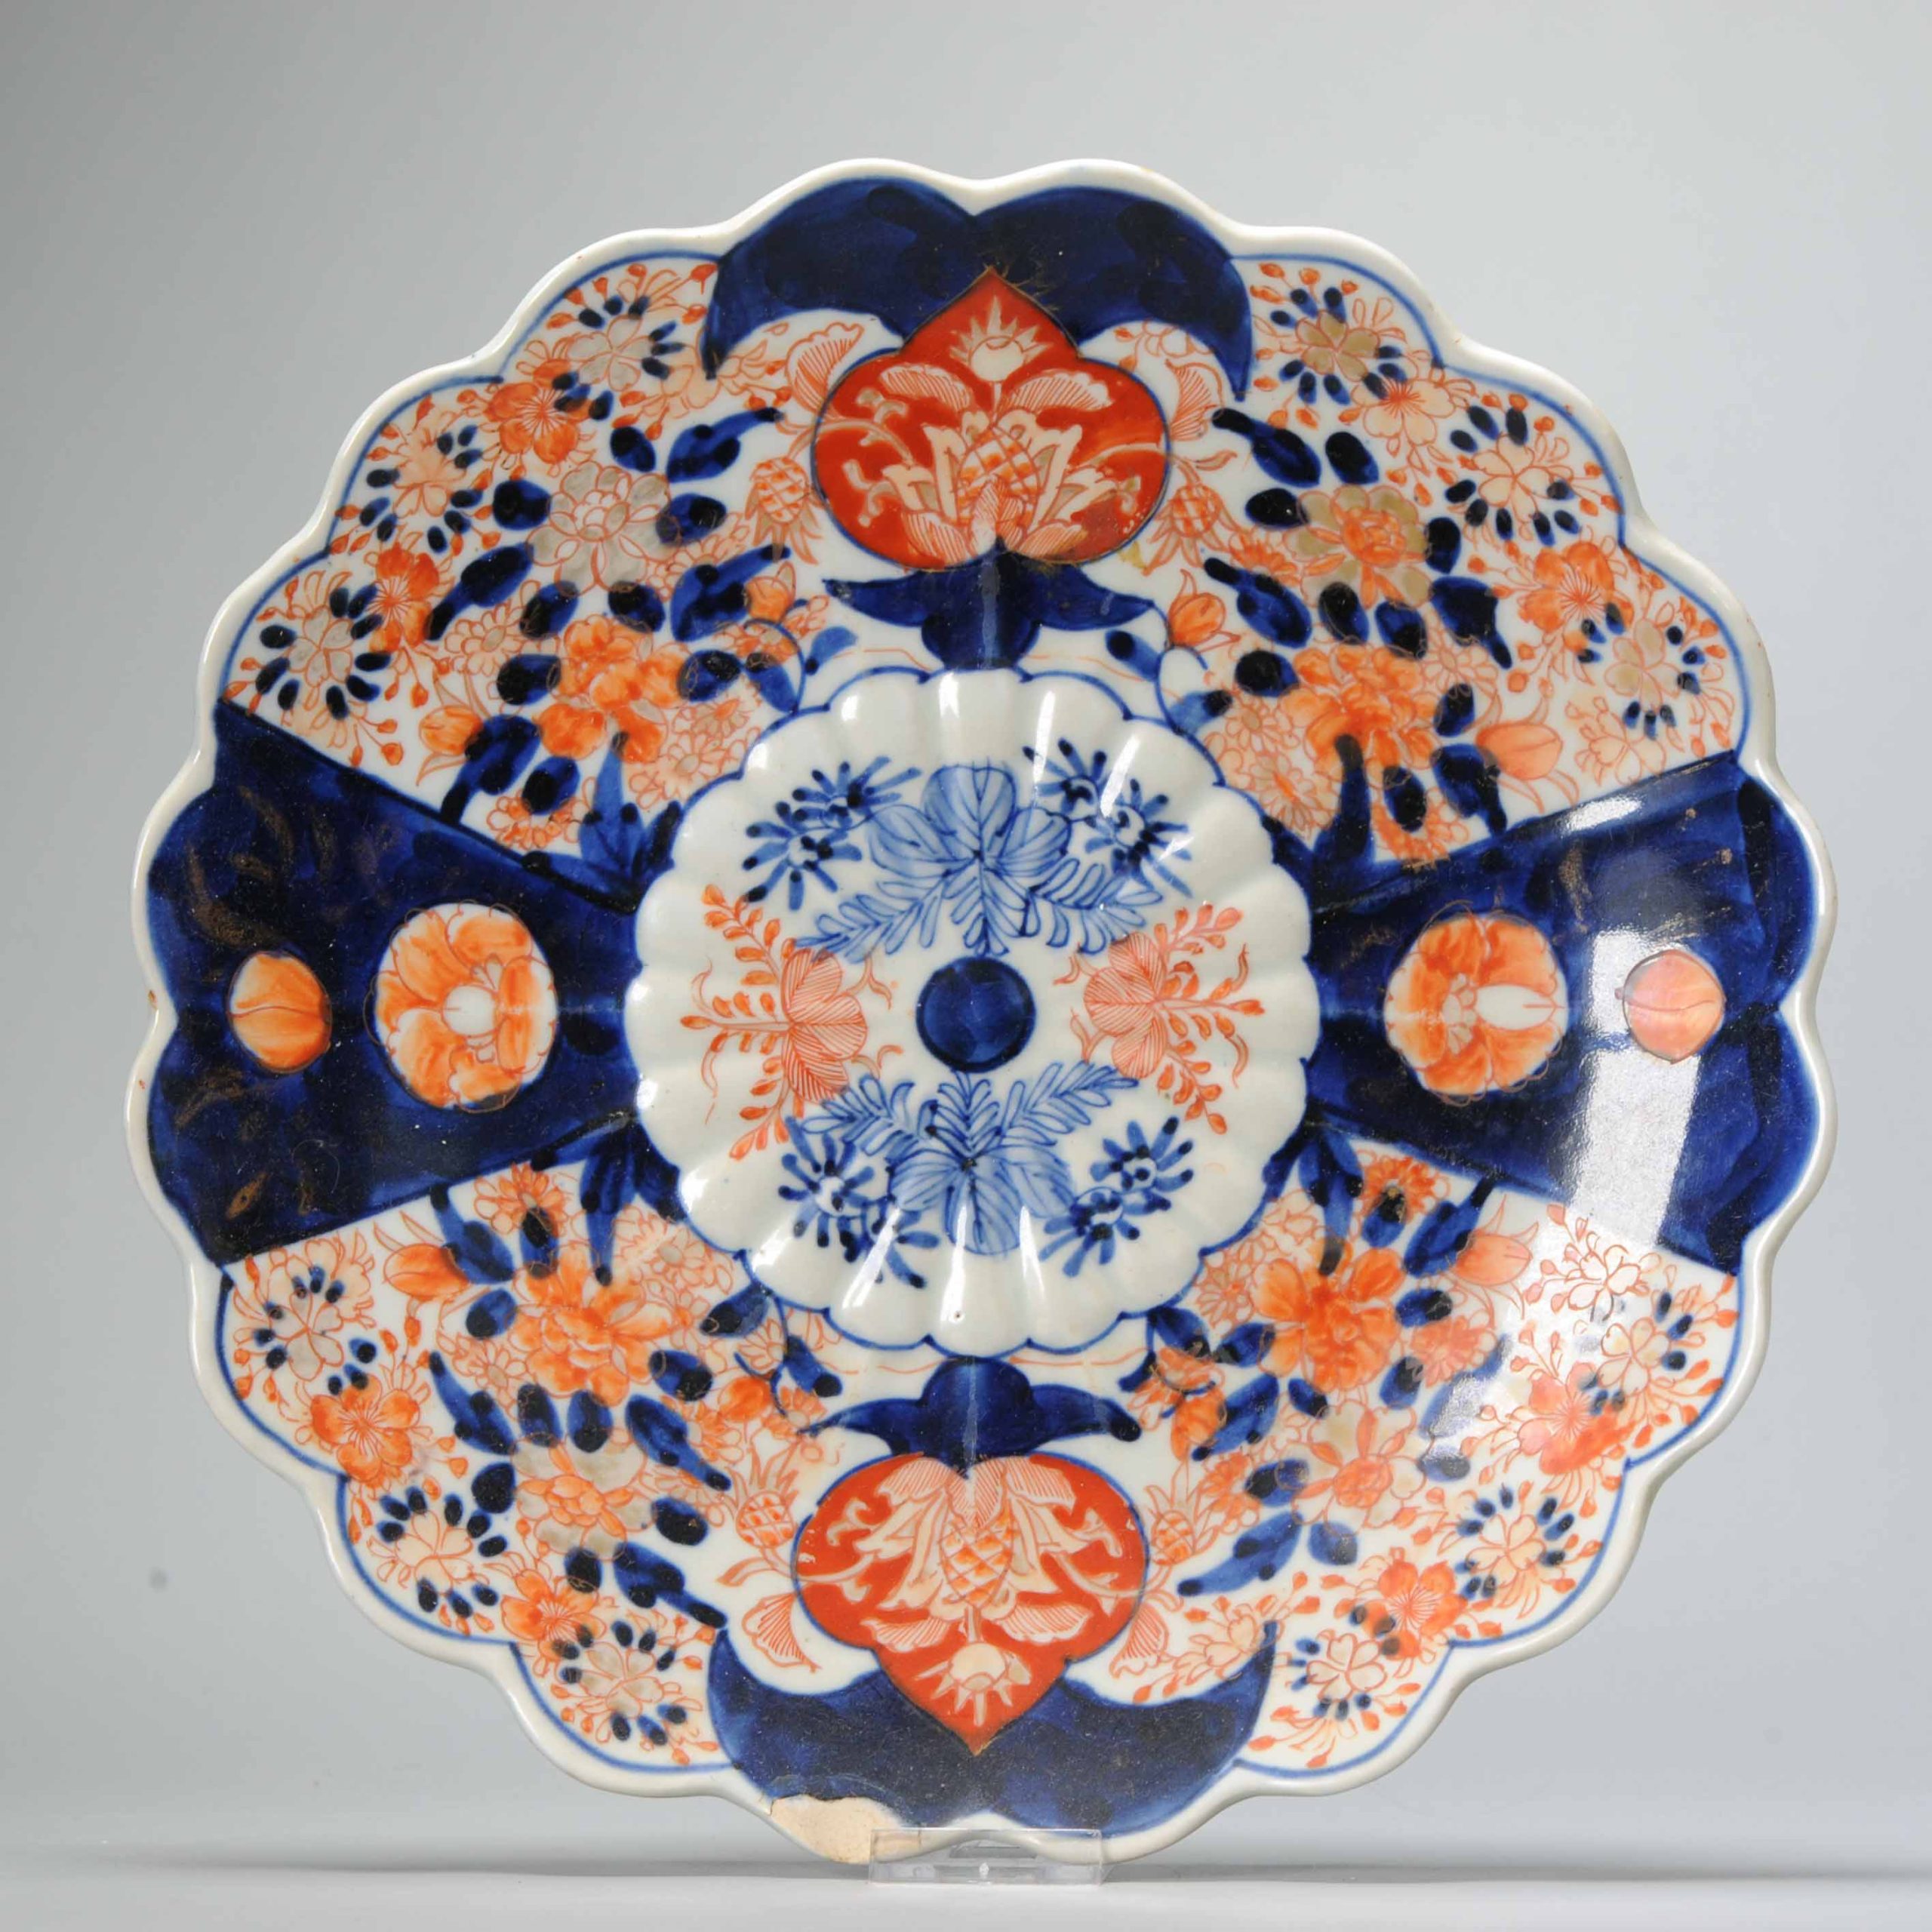 Antique Japanese 19th c Arita Imari Charger with Flowers Japan